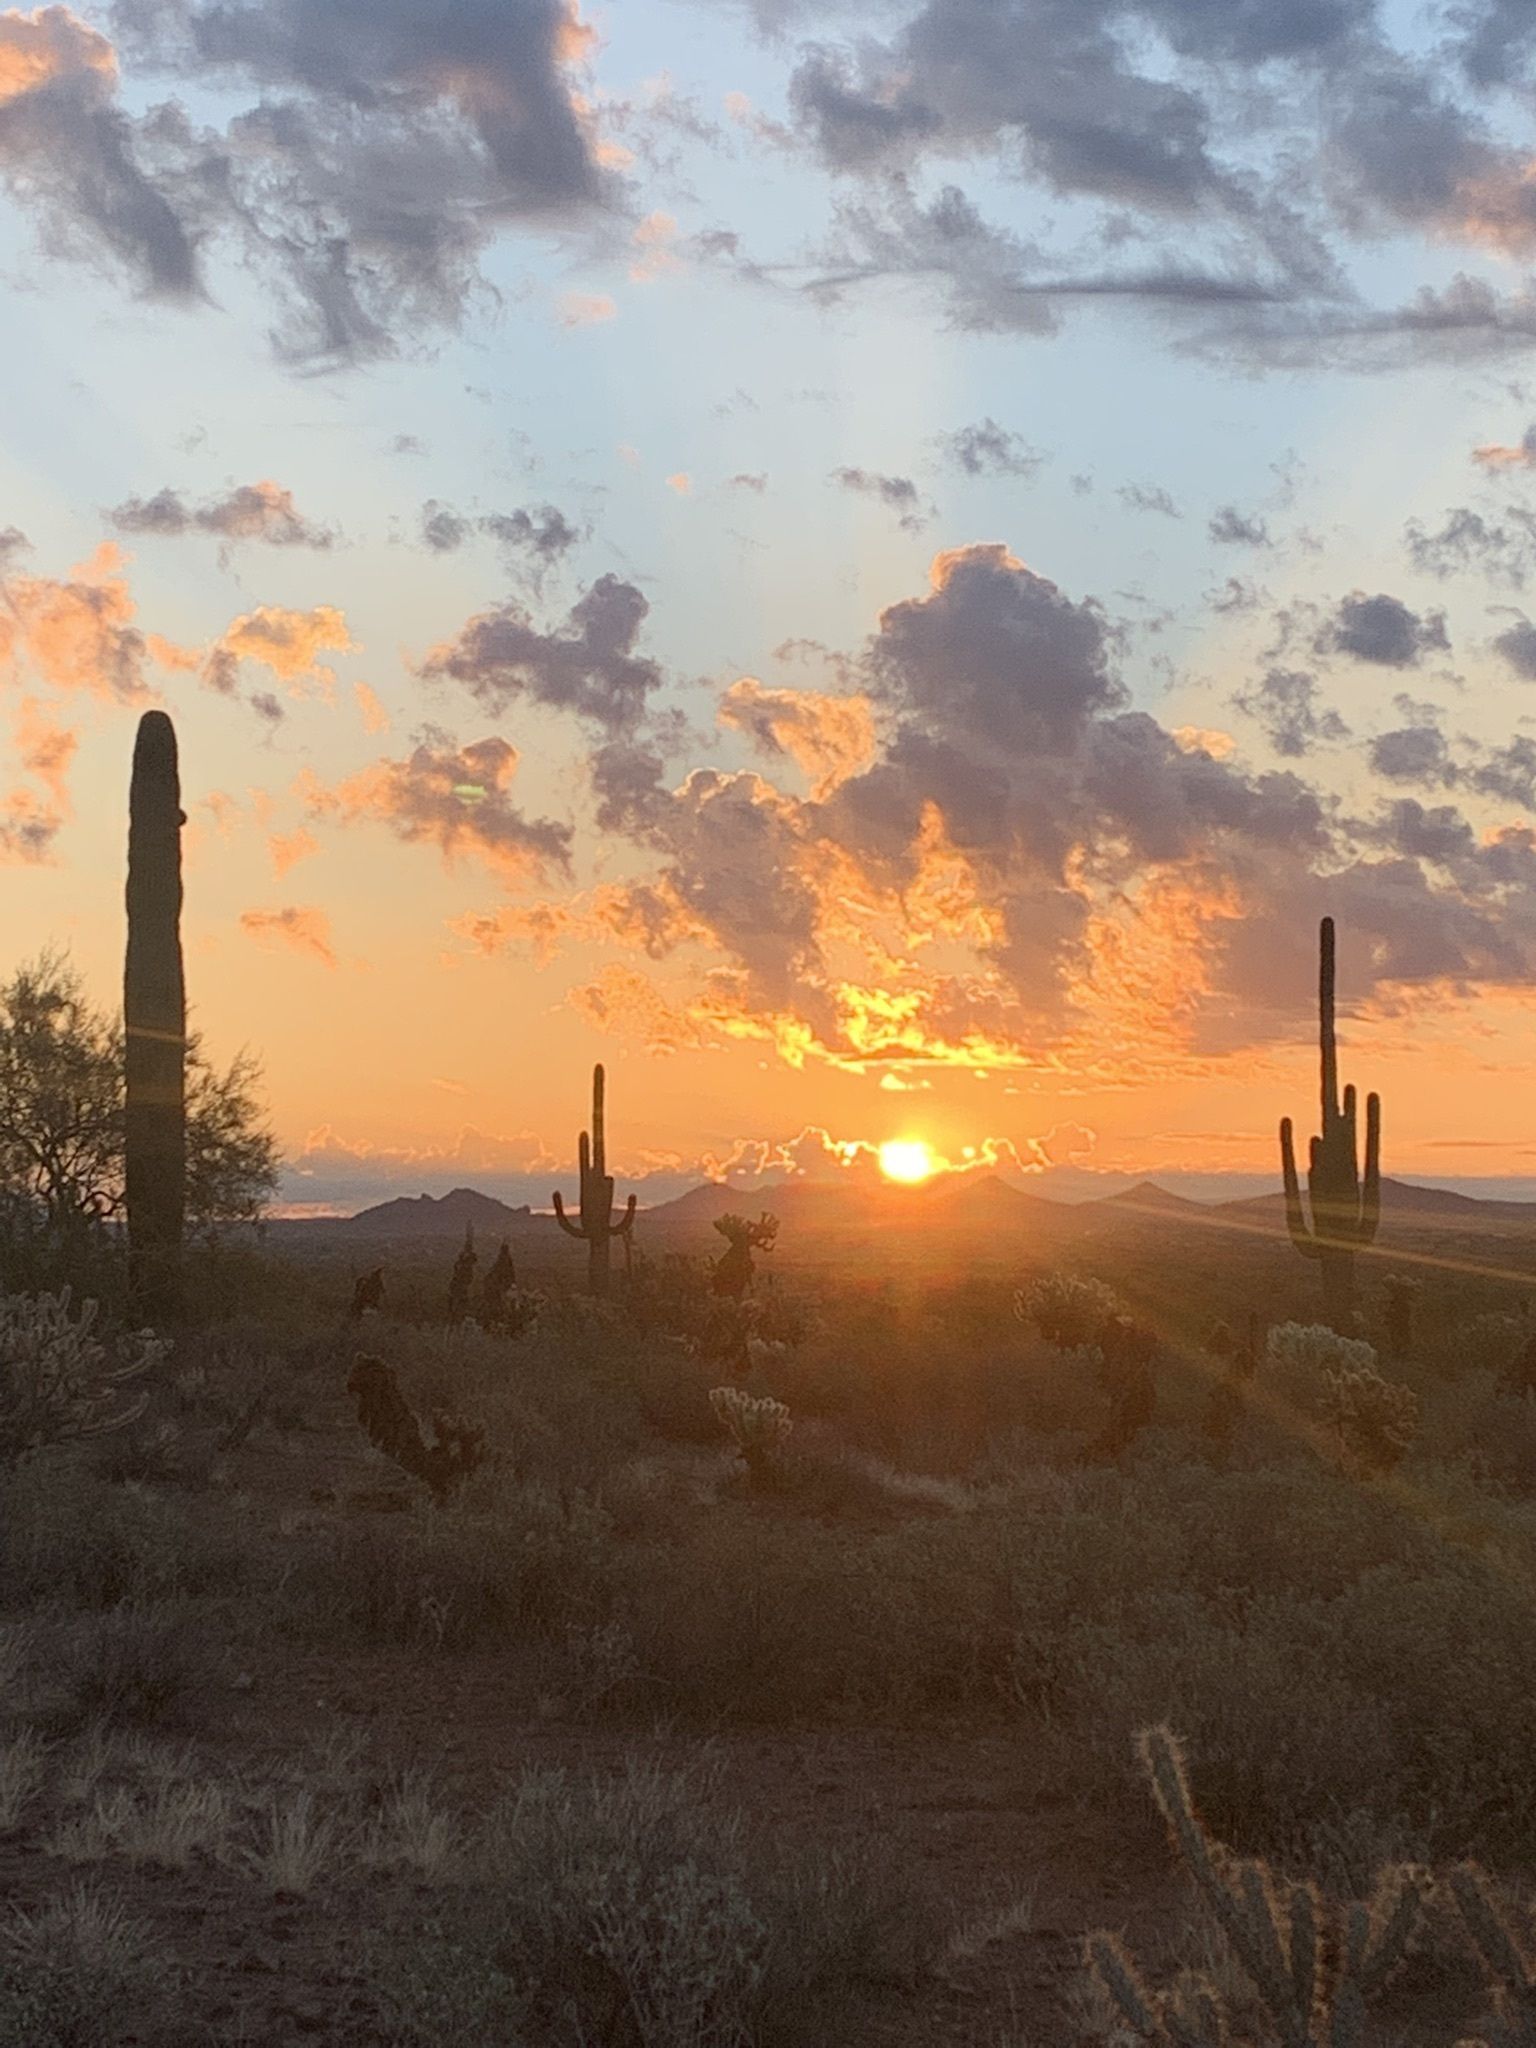  Apache Wash Loop Trail is an excellent choice for Sonoran desert sunsets